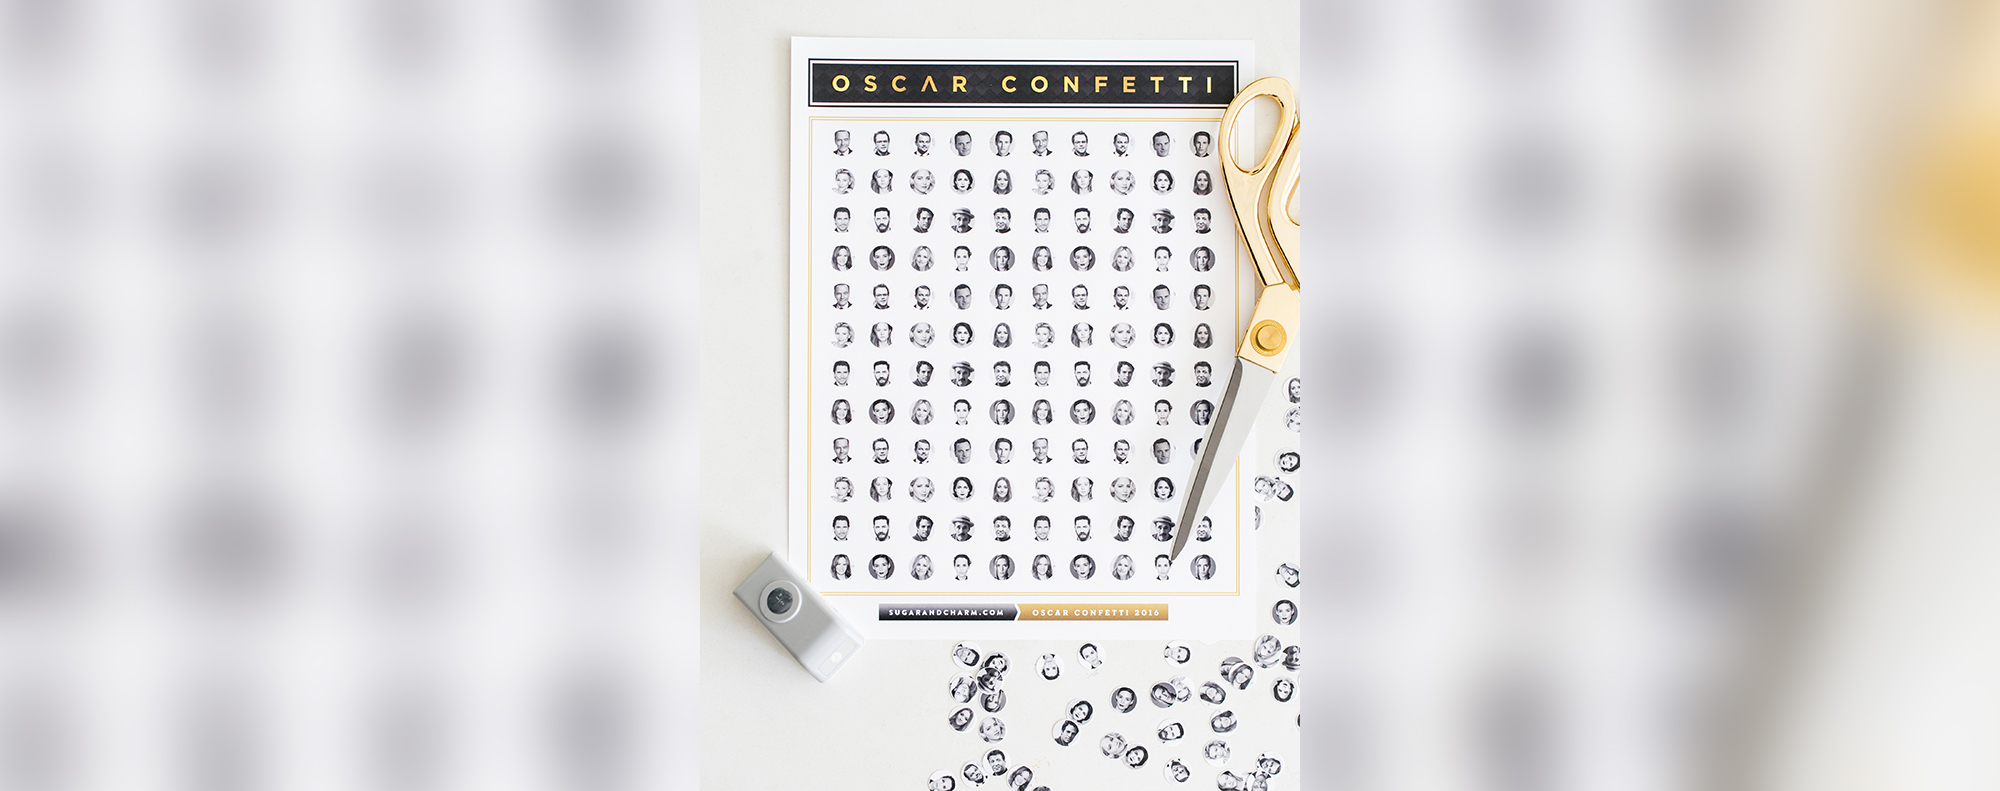 PHOTO: The Sugar and Charm blog created a Oscar Nominee Confetti D-I-Y, pictured here.